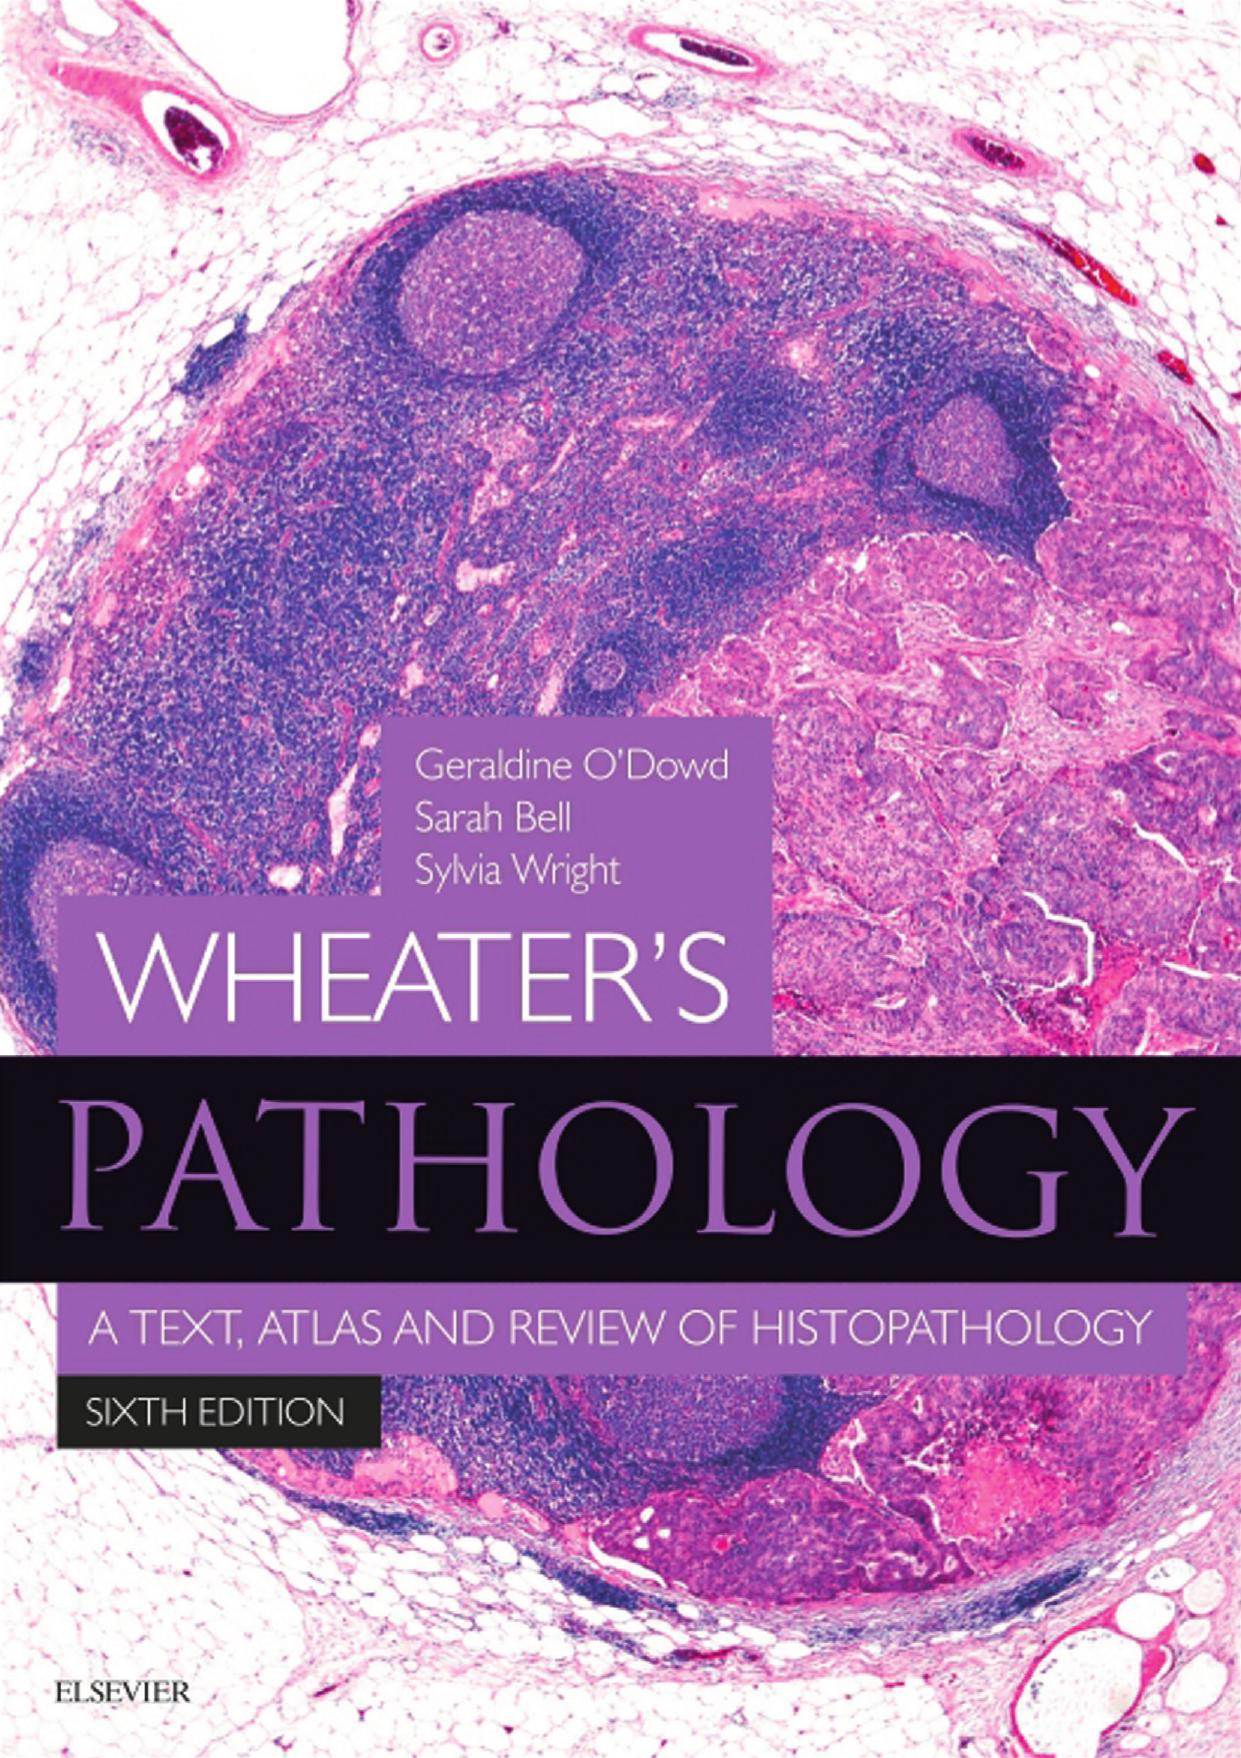 Wheater’s Pathology. A Text, Atlas And Review Of Histopathology (2020)